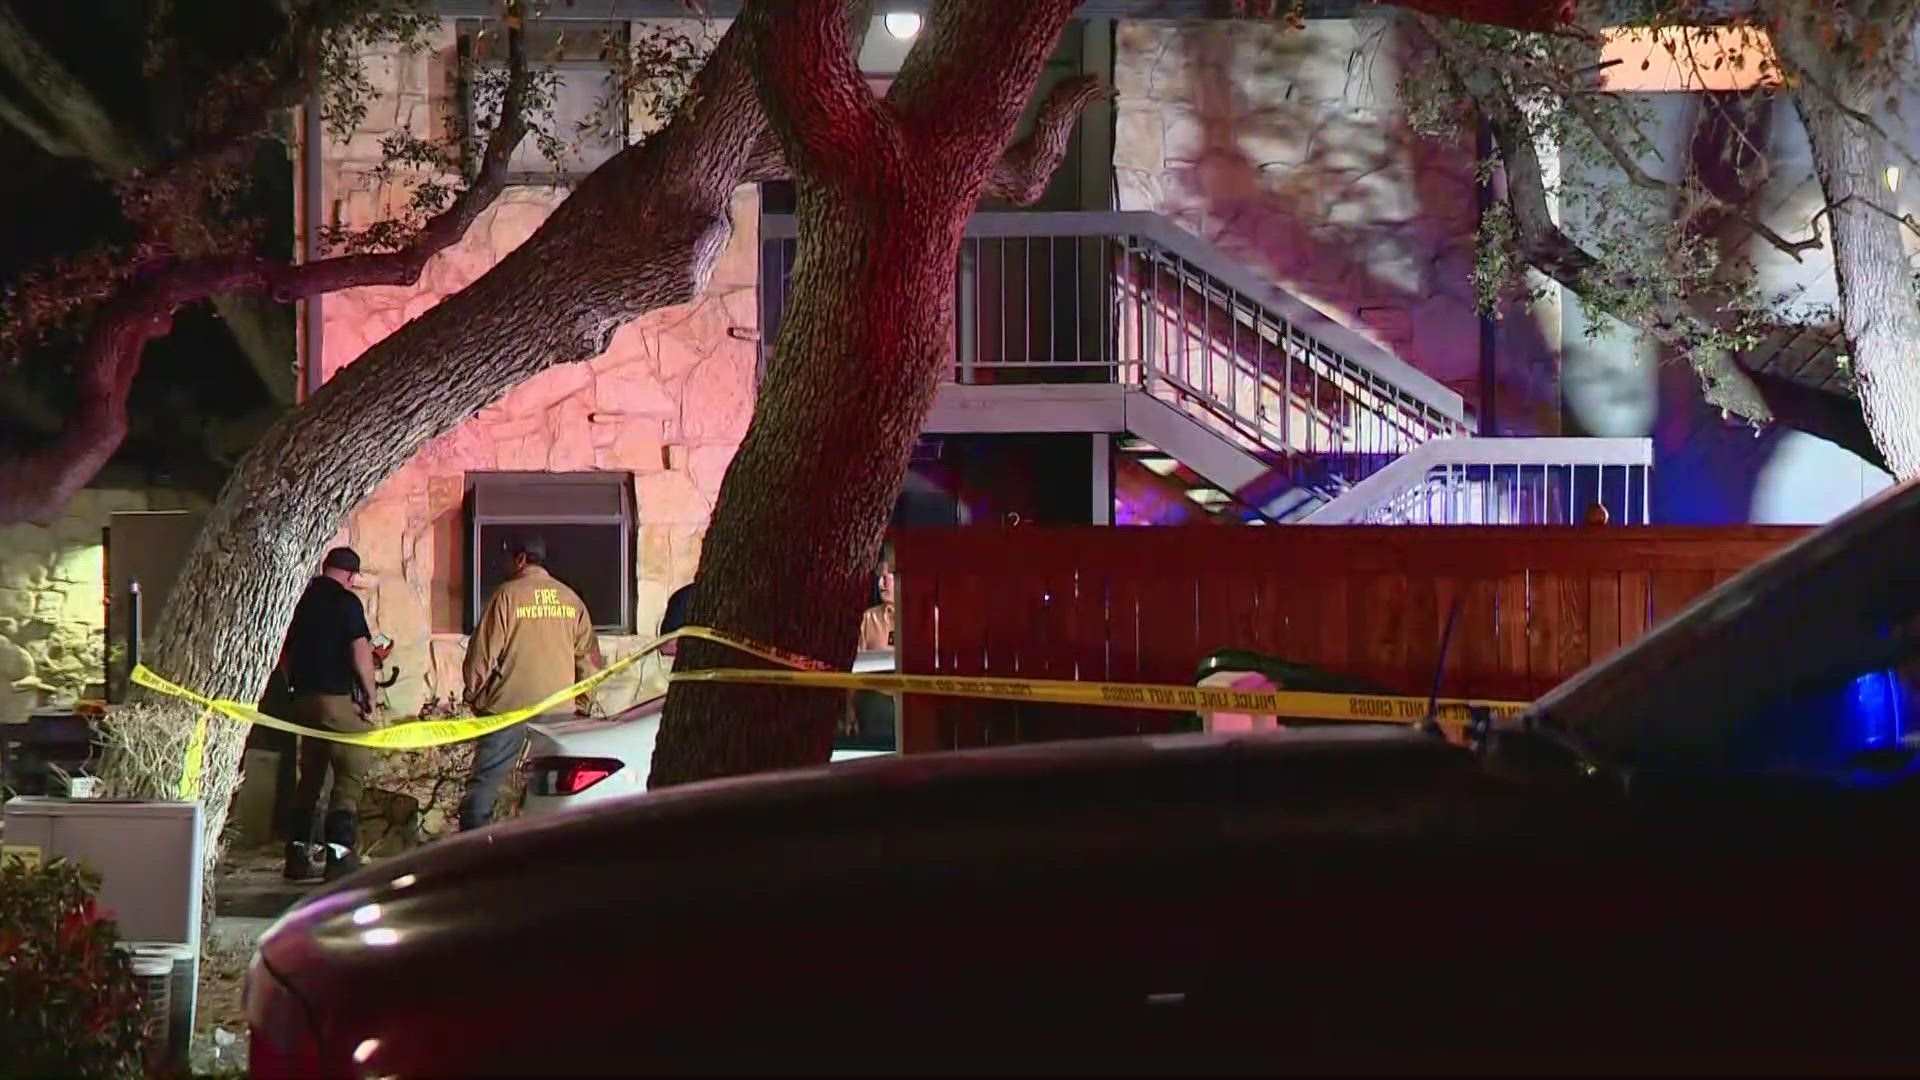 Firefighters responded to the fire and found the deceased man inside, shot several times.